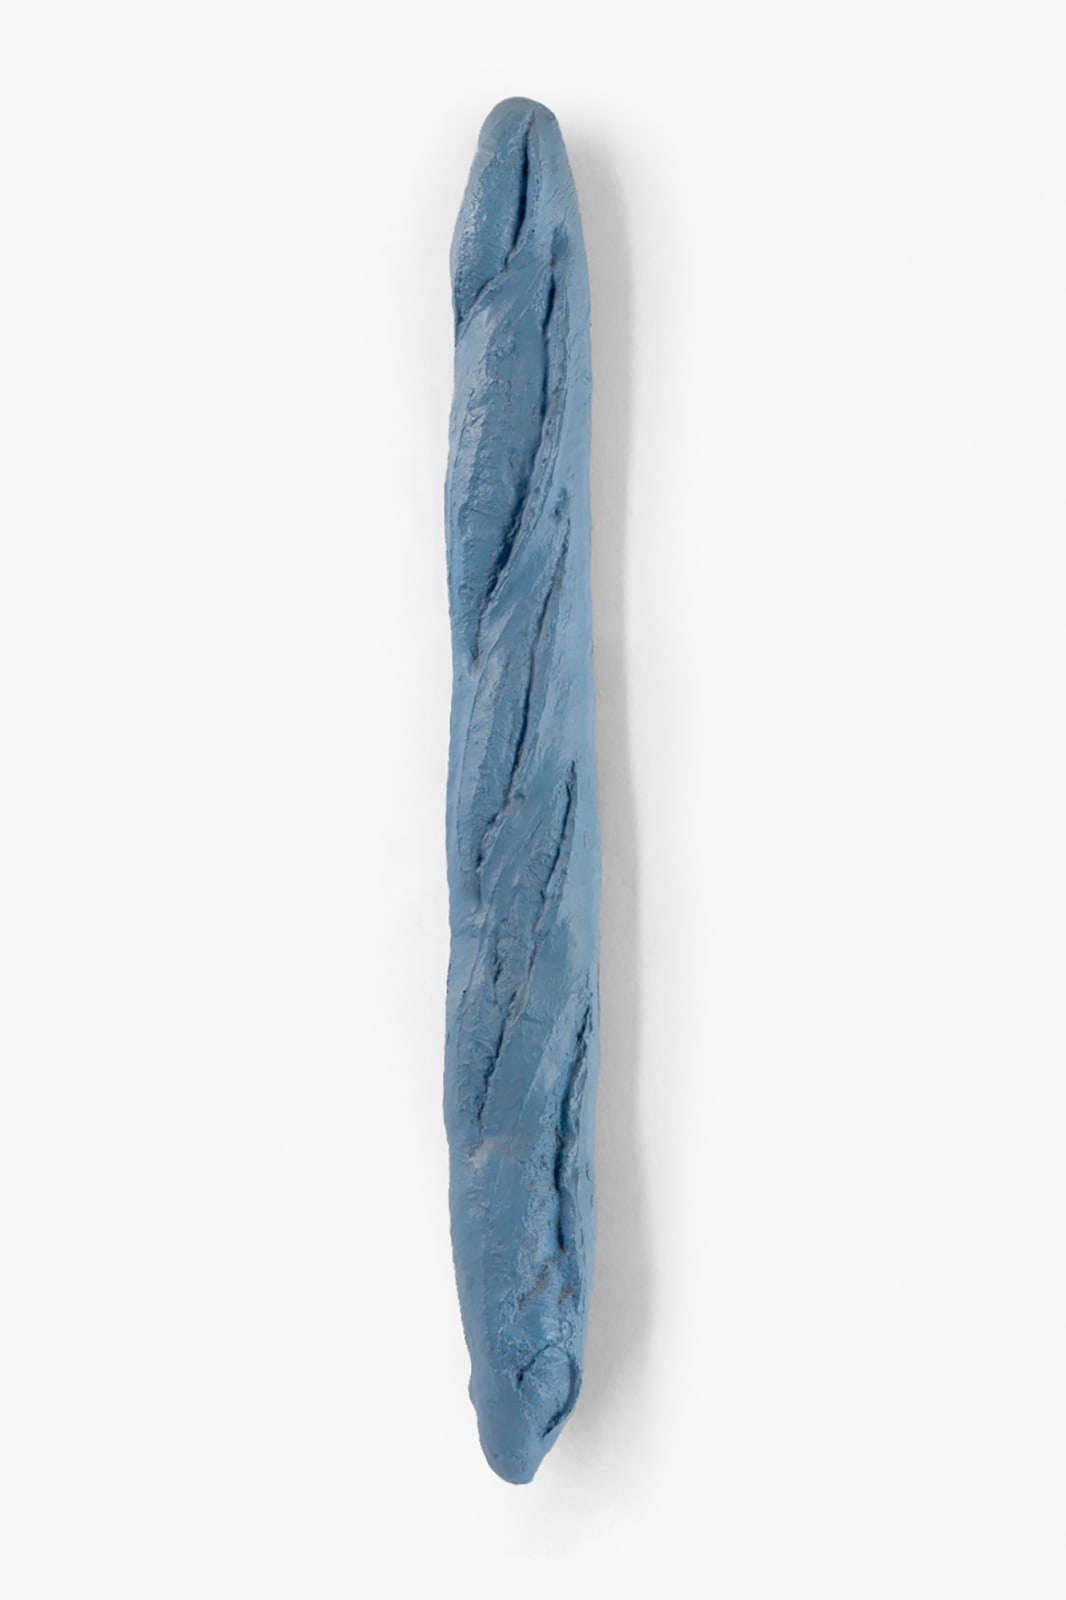 MAN RAY, Blue Bread – Favourite food for the Blue Birds, 1966